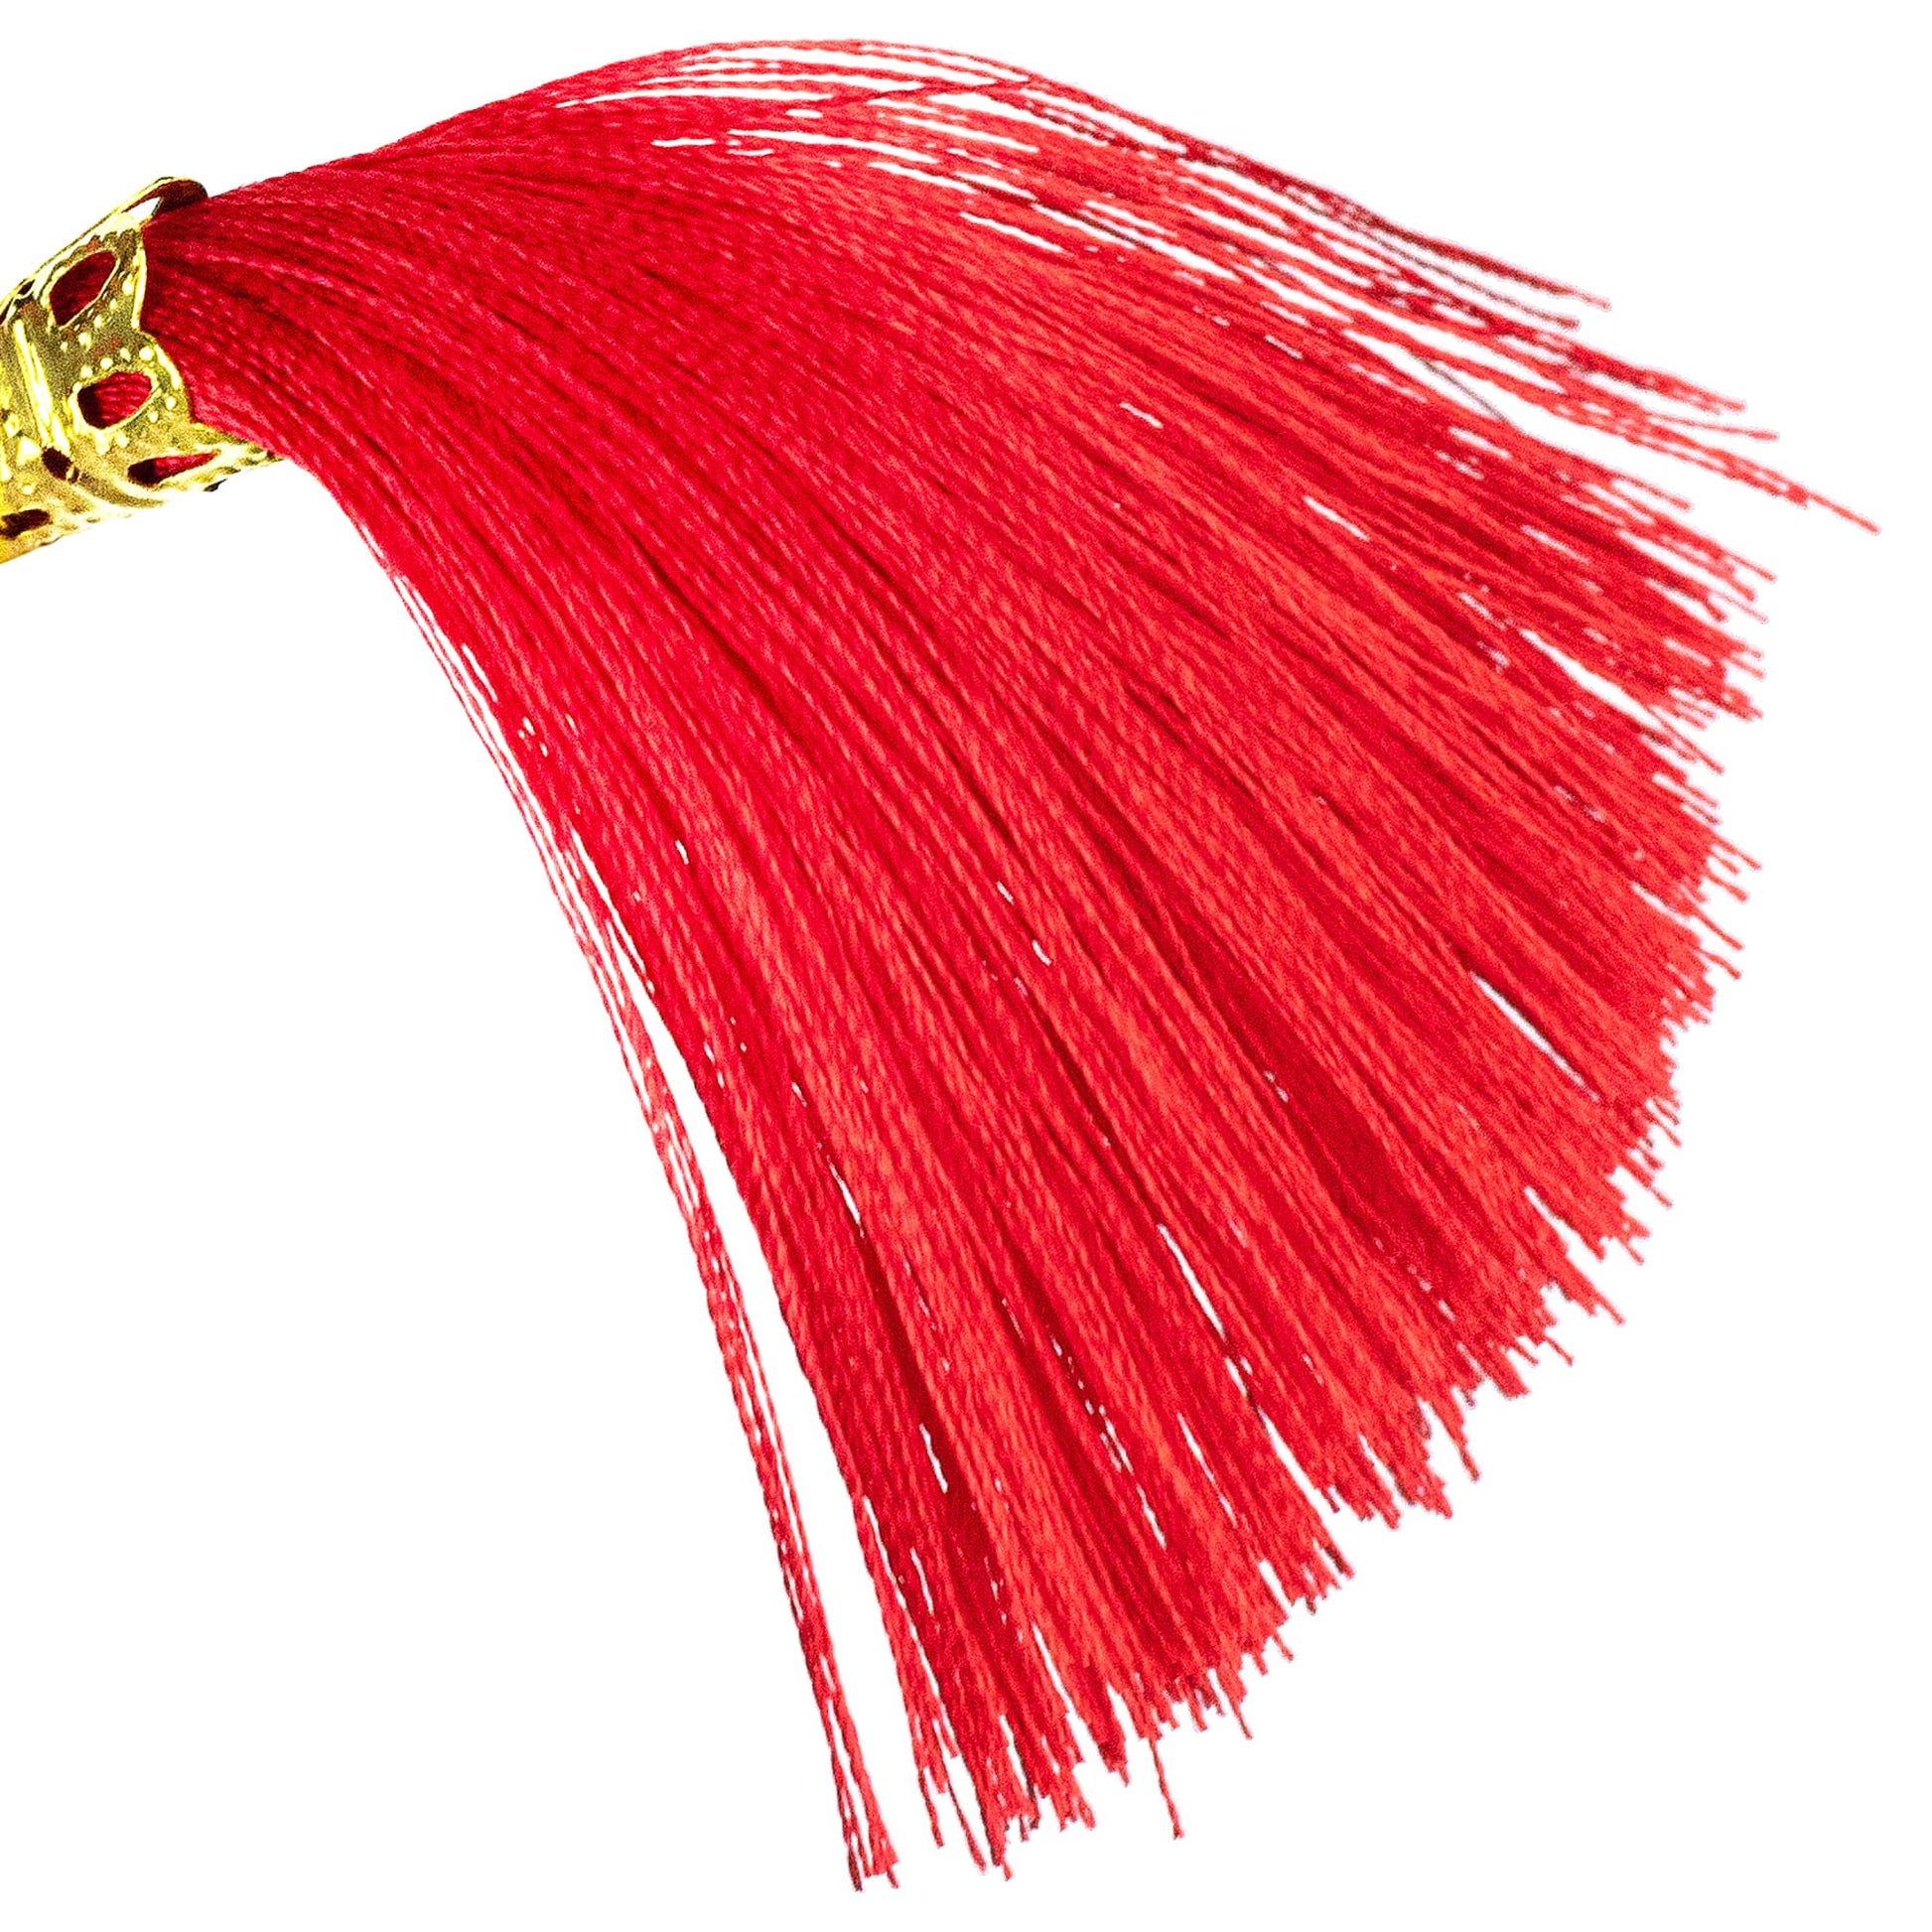 The red sexy tassels of the nipple clit tassel clamp with chain